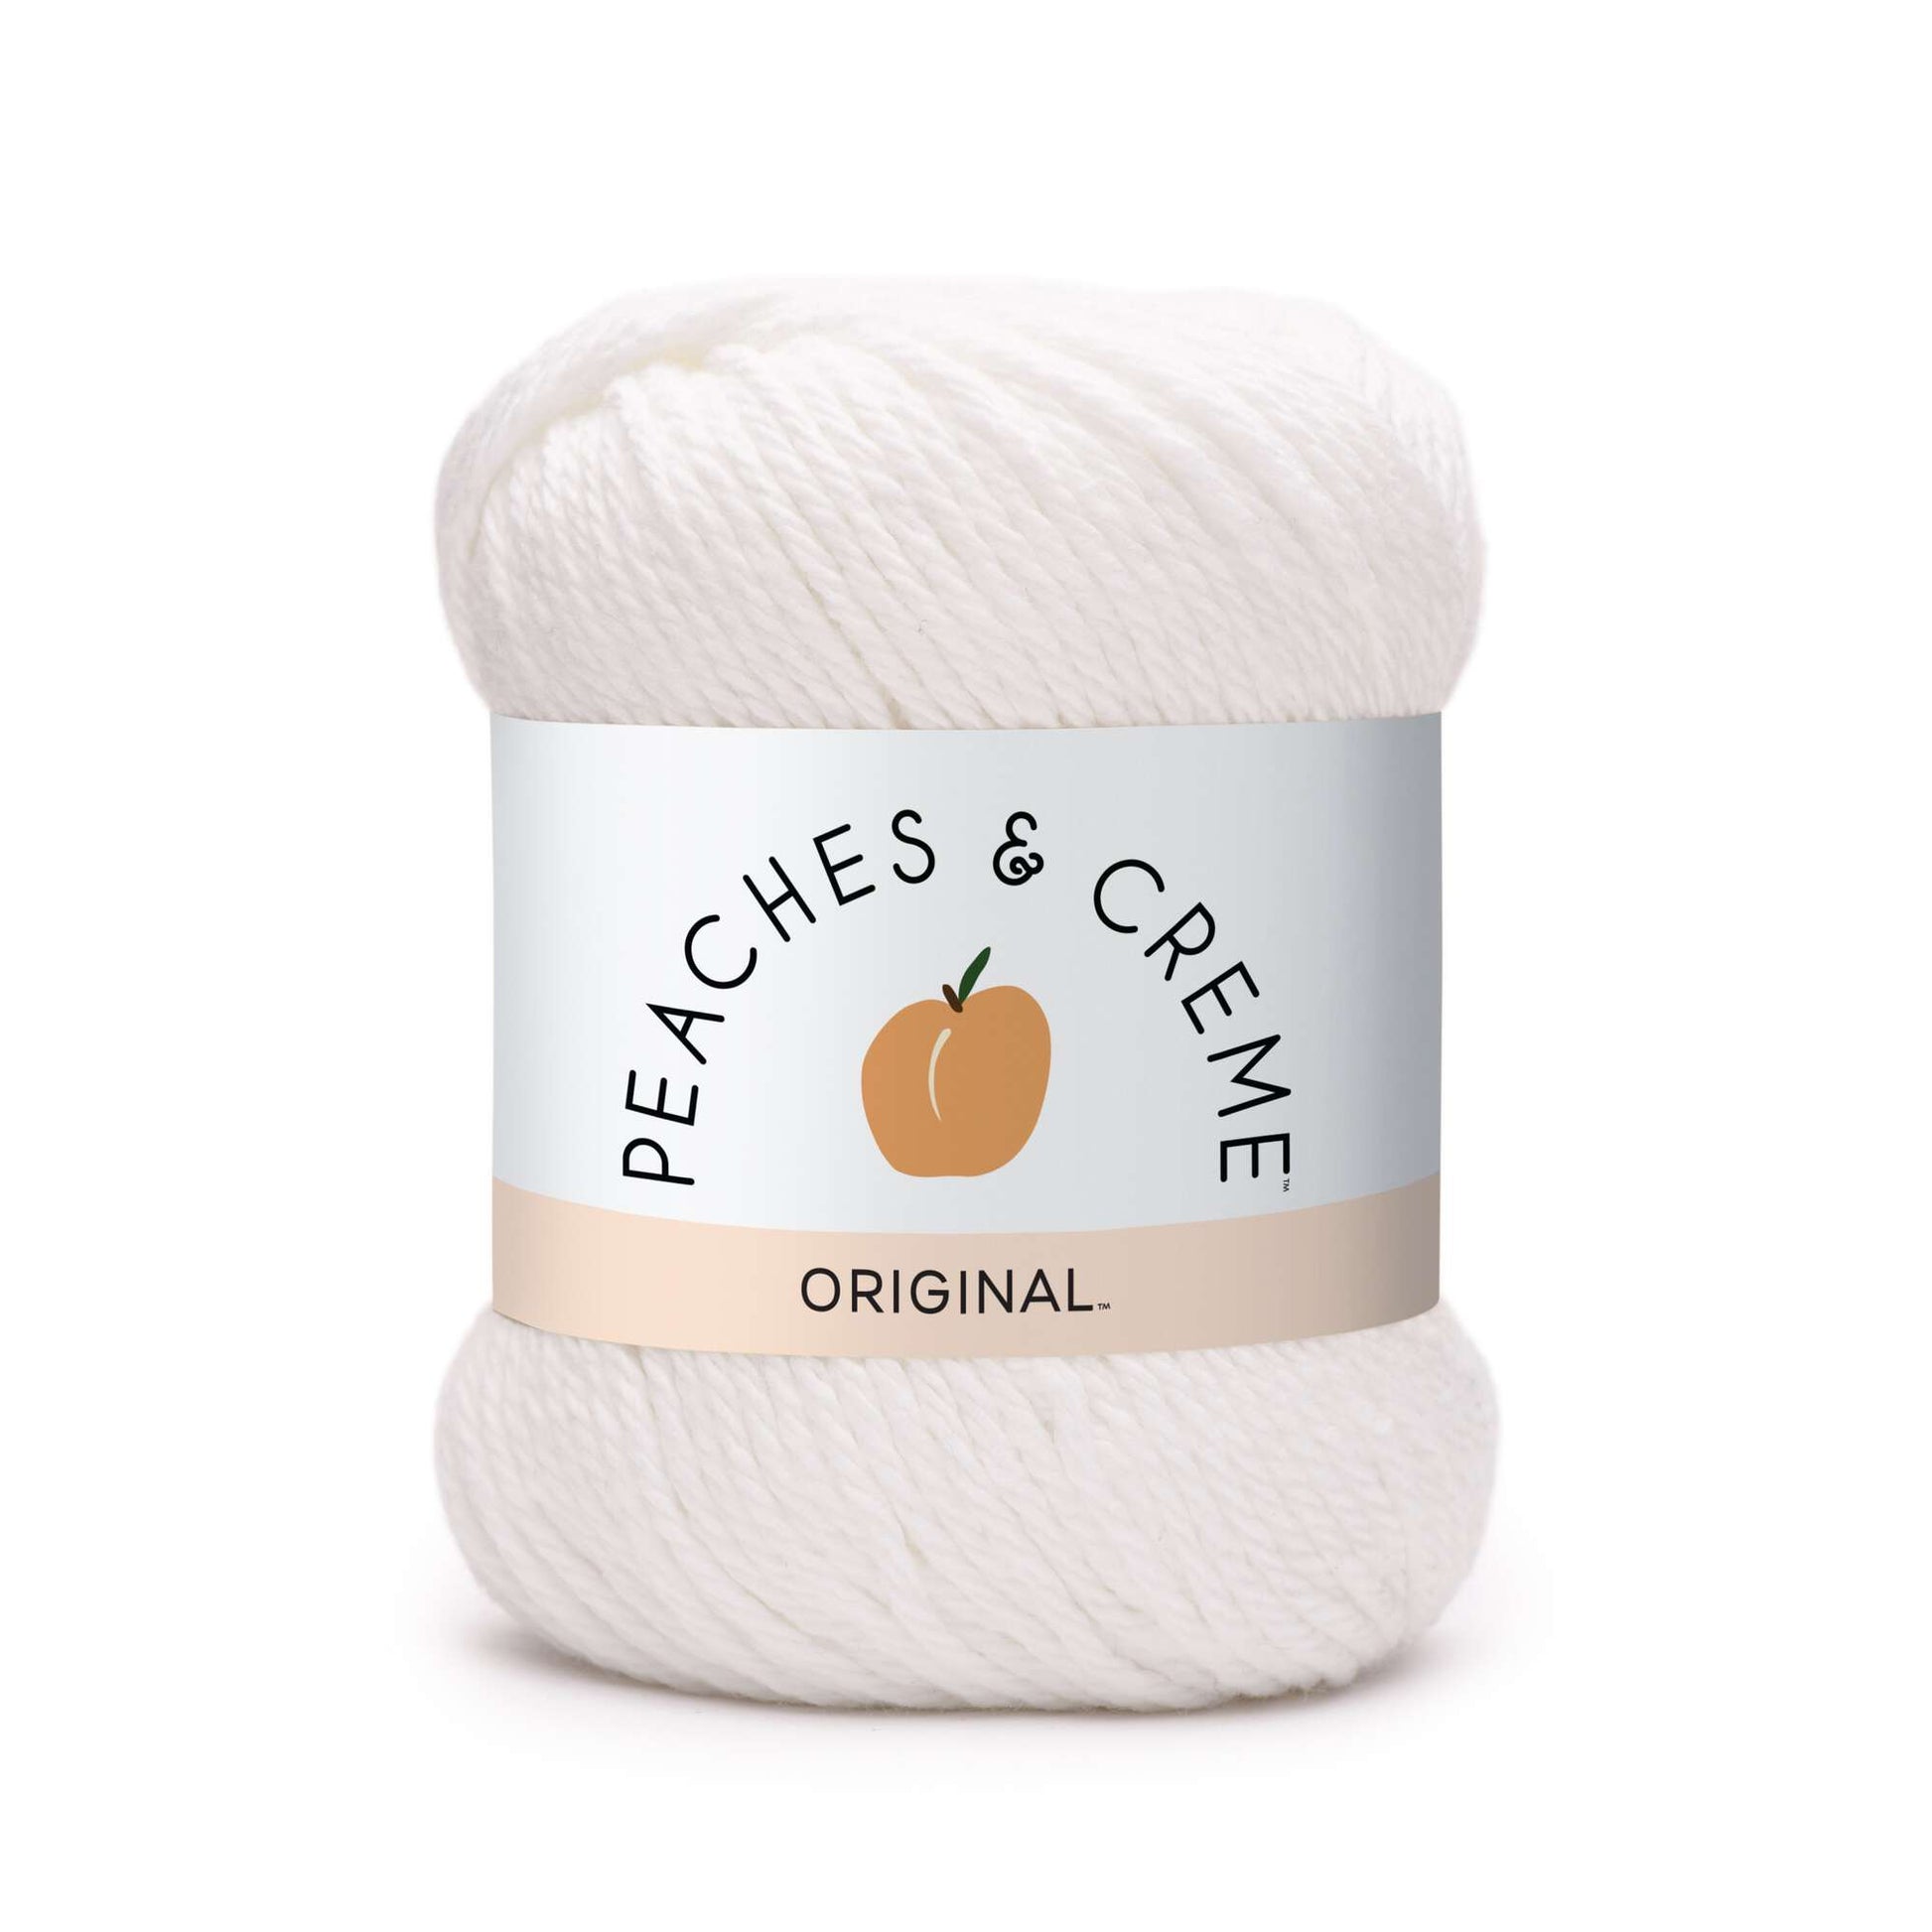  60g Peach Yarn for Crocheting and Knitting;66m (72yds) Cotton  Yarn for Beginners with Easy-to-See Stitches;Worsted-Weight Medium  #4;Cotton-Nylon Blend Yarn for Beginners Crochet Kit Making